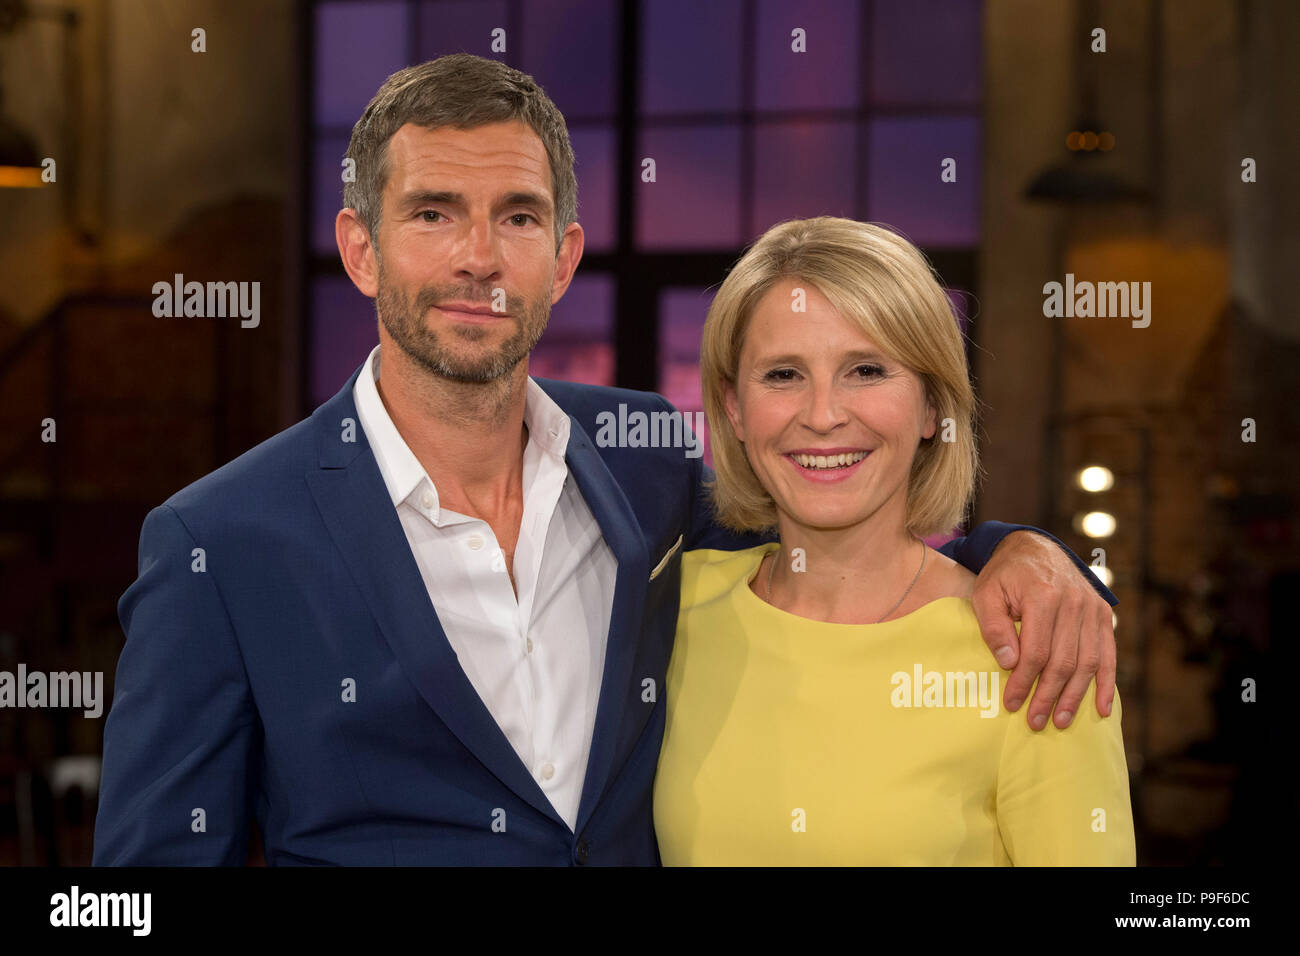 Cologne, Deutschland. 17th July, 2018. Micky BEISENHERZ, Germany, Moderator, Susan LINK, Germany, presenter, host of the program 'Koelner Sommer-Treff' on WDR television, recording on 17.07.2018, broadcast on 10th August 2018. | usage worldwide Credit: dpa/Alamy Live News Stock Photo